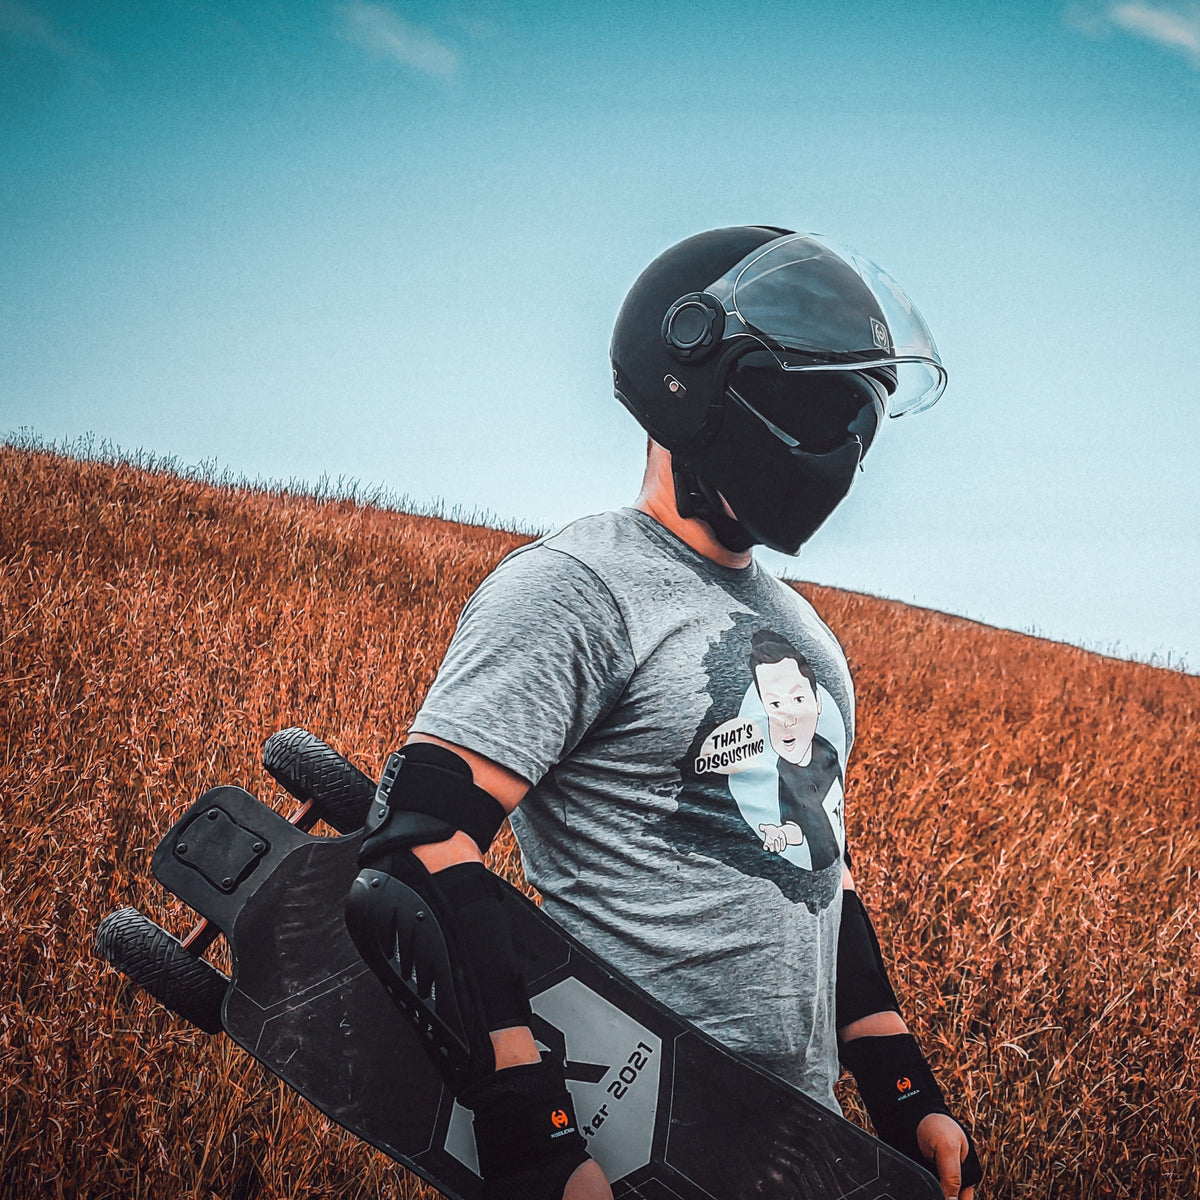 Face Skateboard Tested And Reviewed – Nobleman